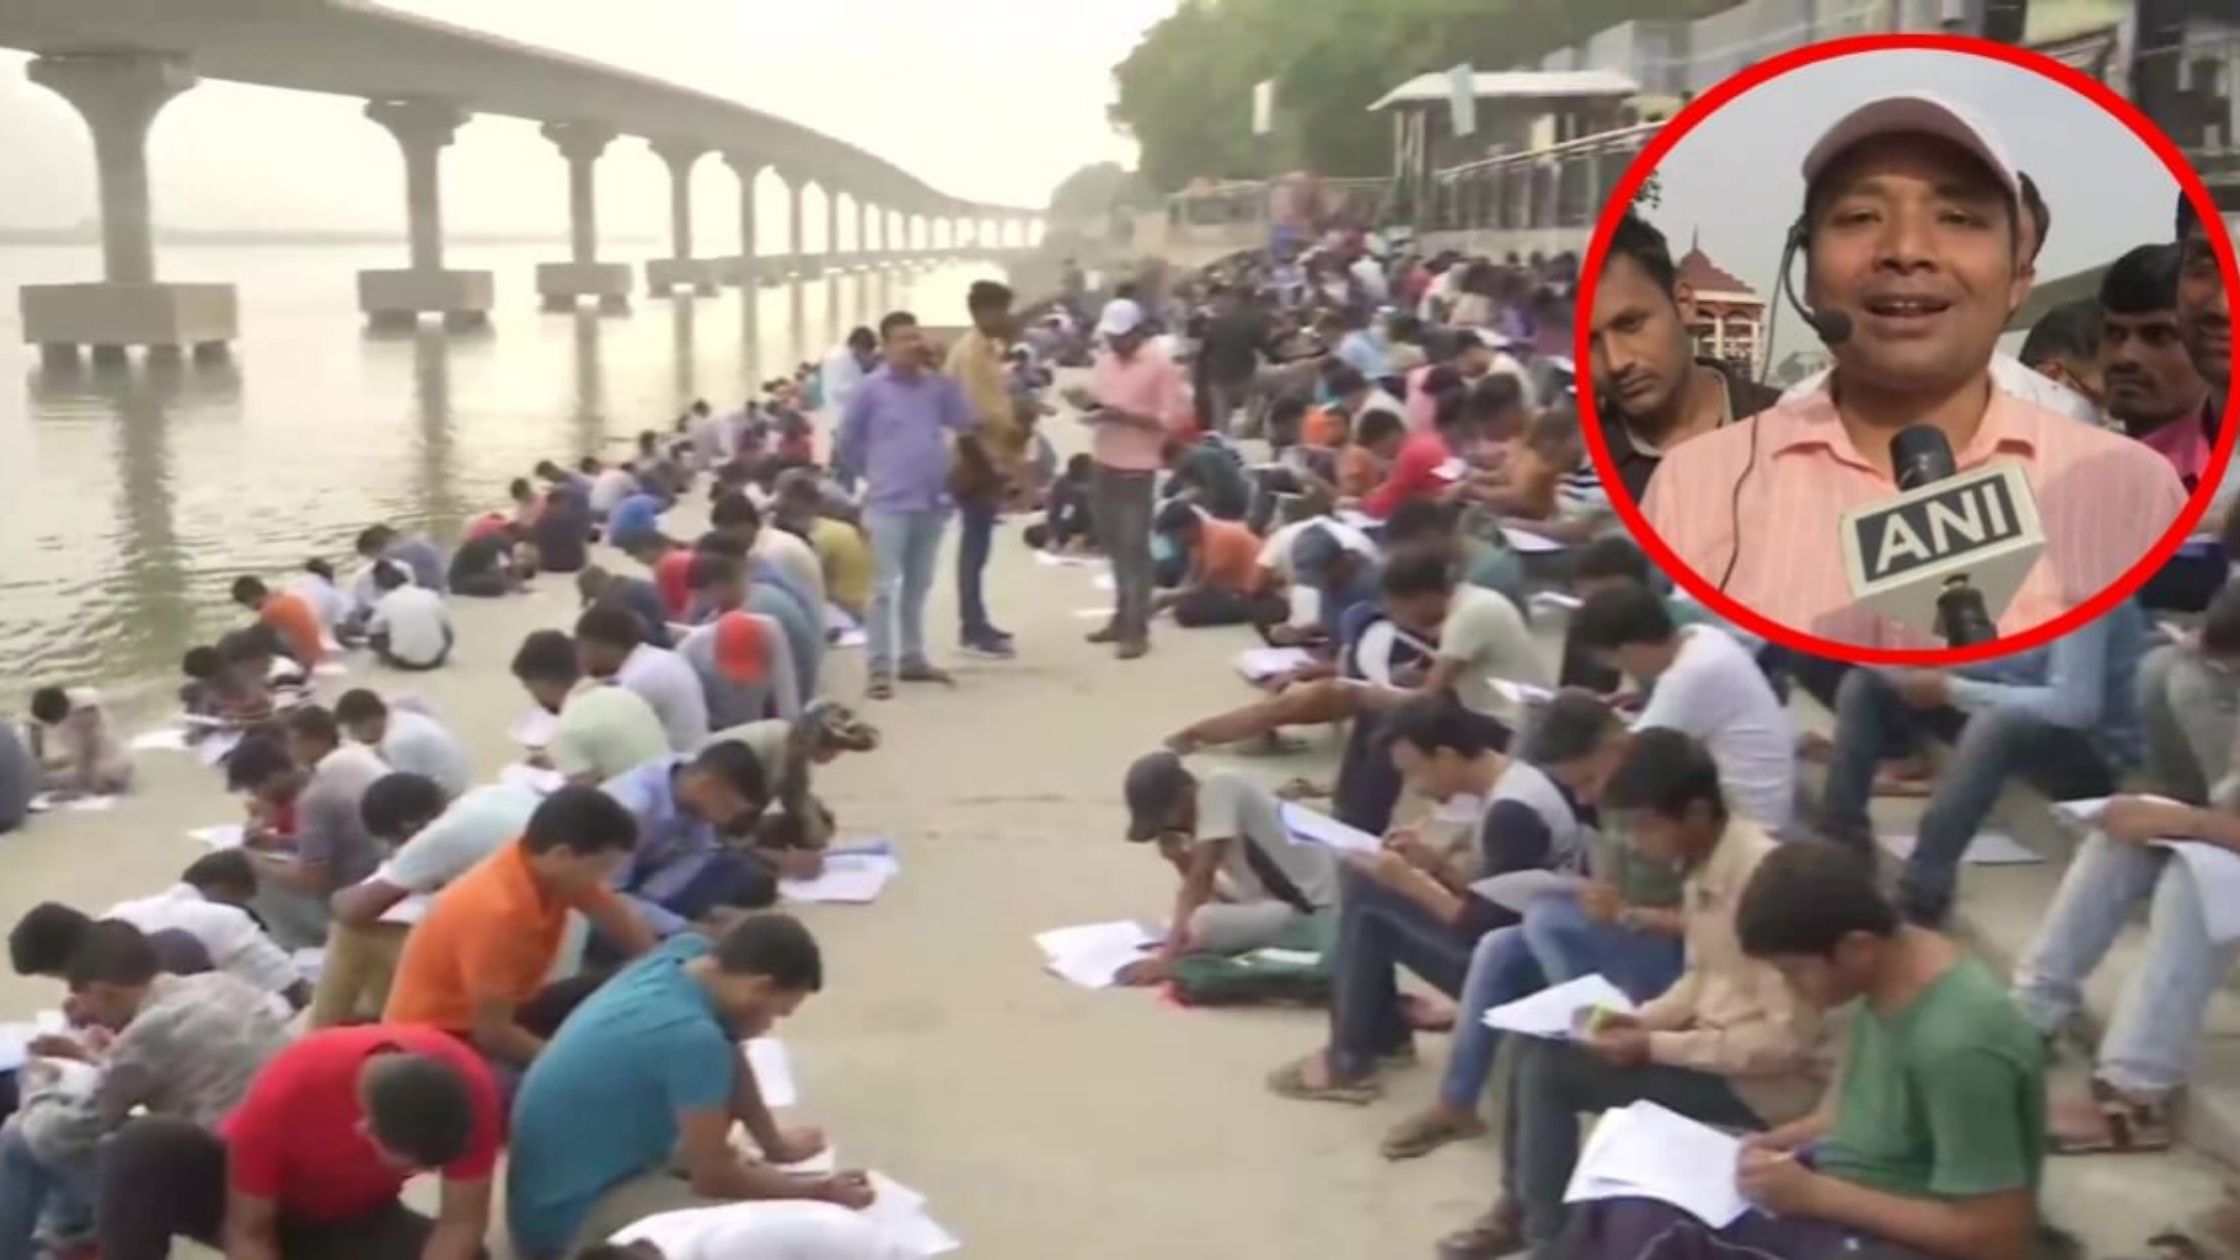 Thousands of youth are preparing for SSC and Railways at Ganga Ghat